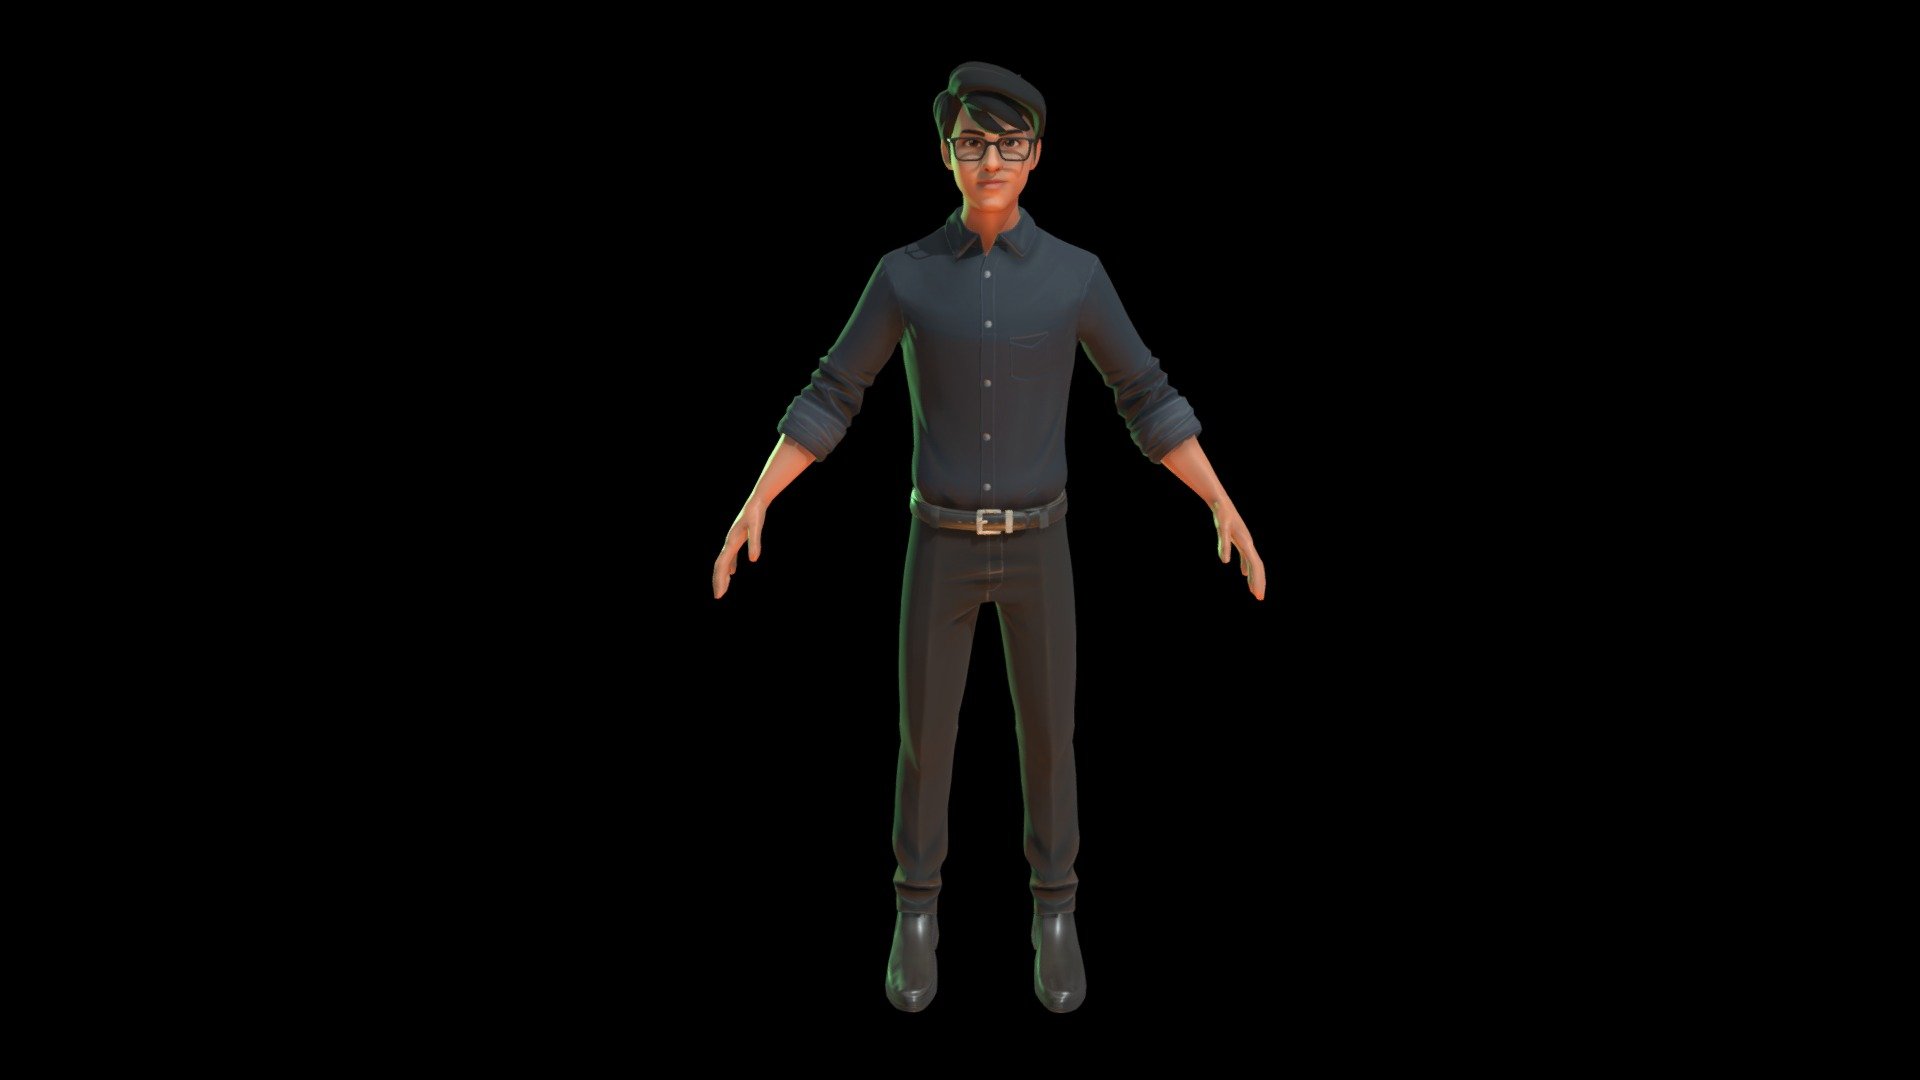 I have rigged this character also, you can get this from here





3D Character Young Boy - Rigged
http://bit.ly/3IkS9JX




3D Alien Rigged Get from here.
https://bit.ly/3ttNaxa



If you have used my above model then I deserve 1 cup of coffee. You can support me by getting rigged 3d model
Soon I will release pack for this character with different clothes, glasses, hairs etc etc. 





 - 3D Character Young Boy - 3D model by Sunny (@sanaullahrais) 3d model